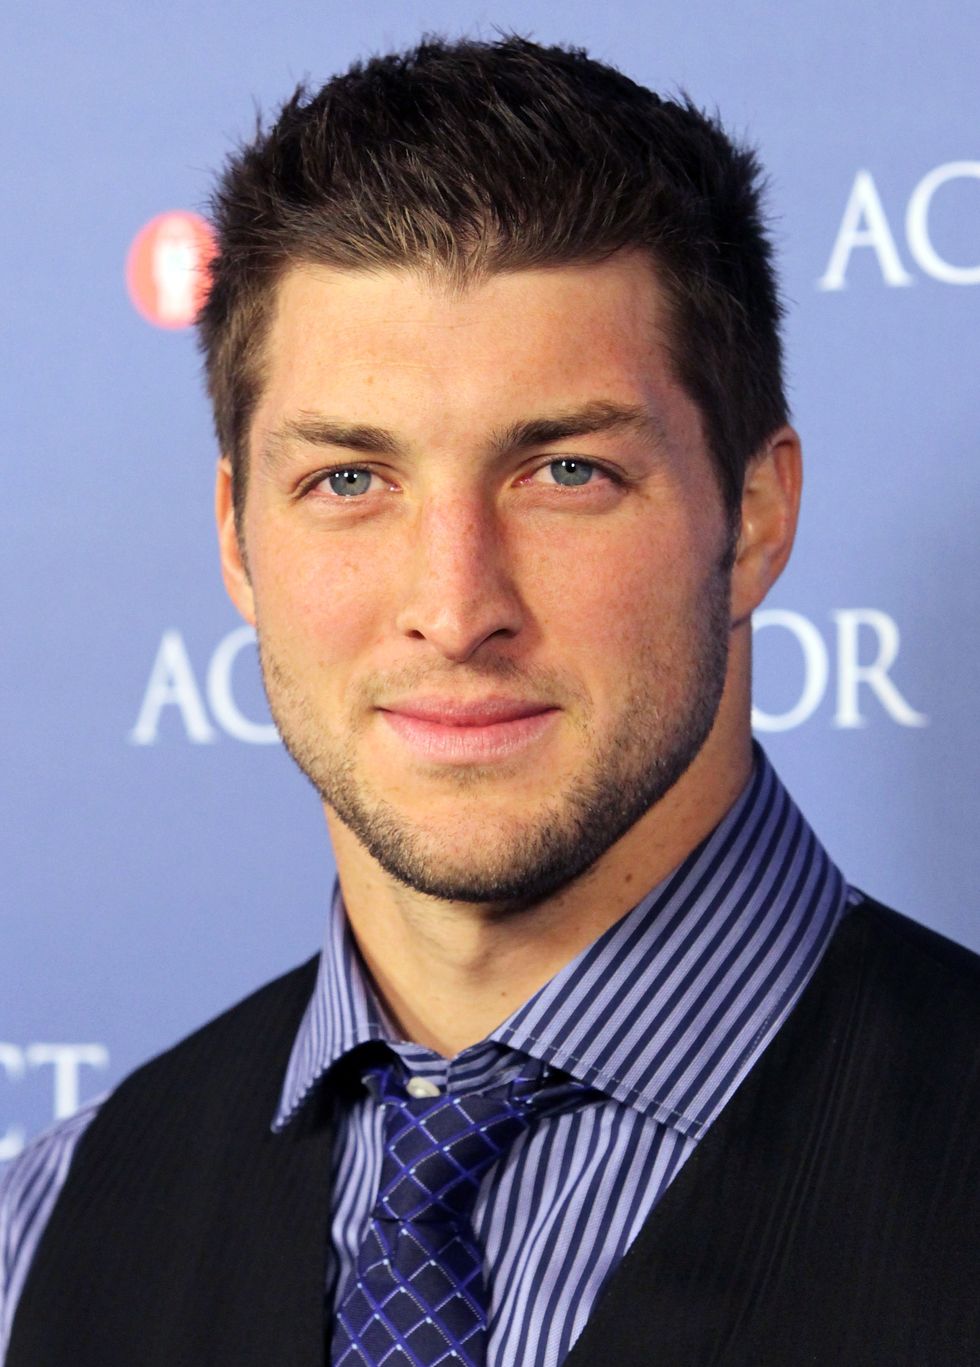 Why Tim Tebow Should Be The Next Bachelor